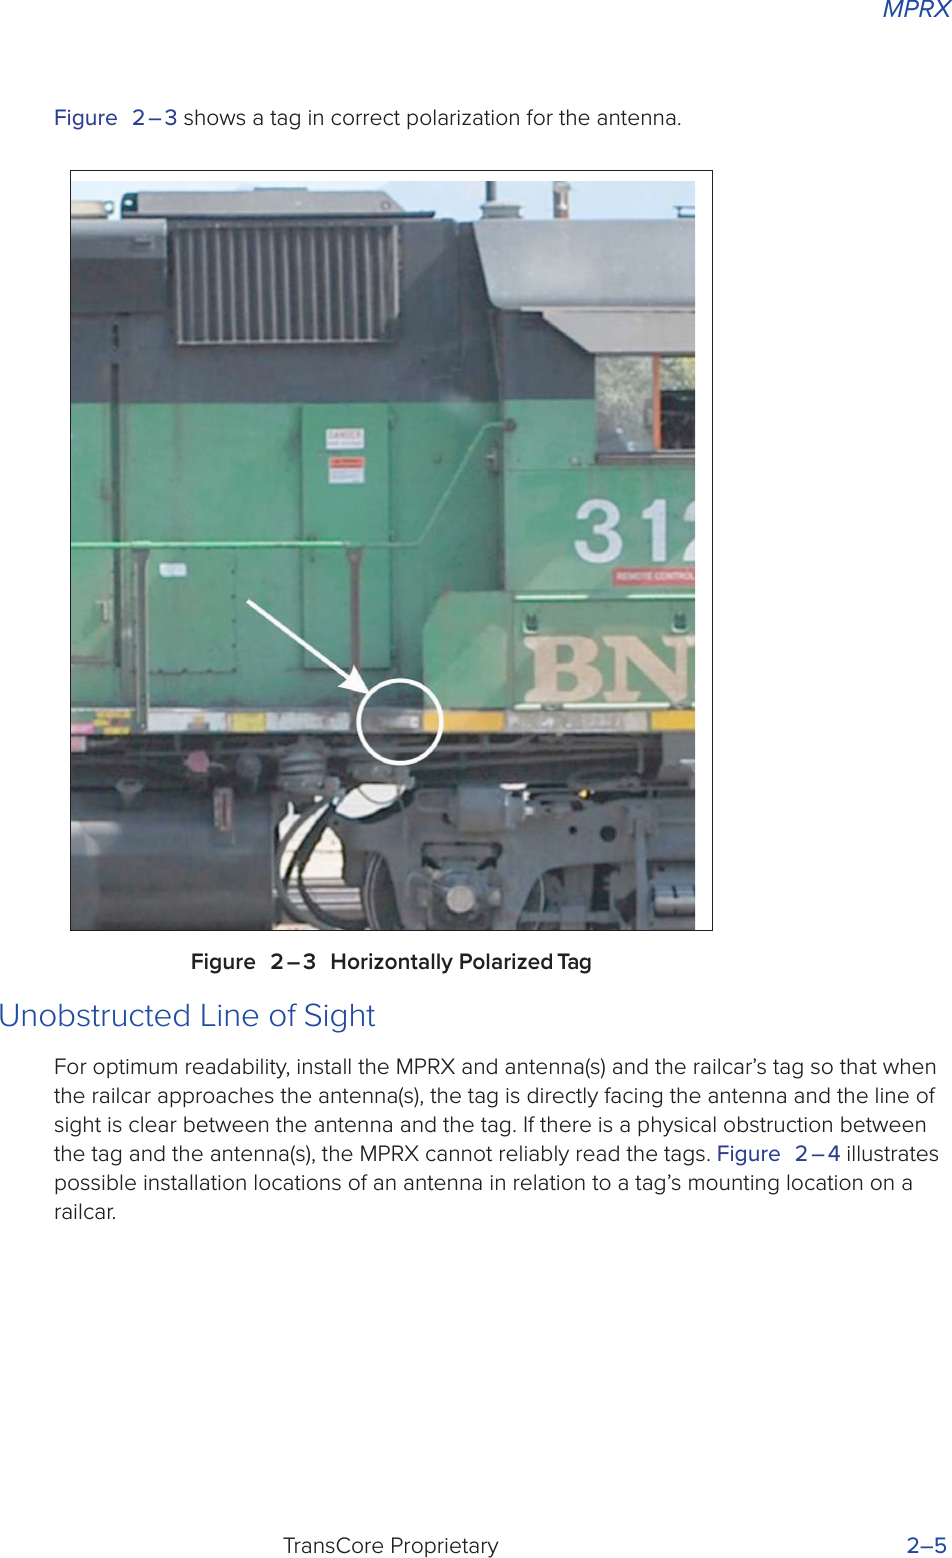 MPRXTransCore Proprietary 2–5Figure 2 – 3 shows a tag in correct polarization for the antenna.Figure 2 – 3 Horizontally Polarized TagUnobstructed Line of SightFor optimum readability, install the MPRX and antenna(s) and the railcar’s tag so that when the railcar approaches the antenna(s), the tag is directly facing the antenna and the line of sight is clear between the antenna and the tag. If there is a physical obstruction between the tag and the antenna(s), the MPRX cannot reliably read the tags. Figure 2 – 4 illustrates possible installation locations of an antenna in relation to a tag’s mounting location on a railcar.